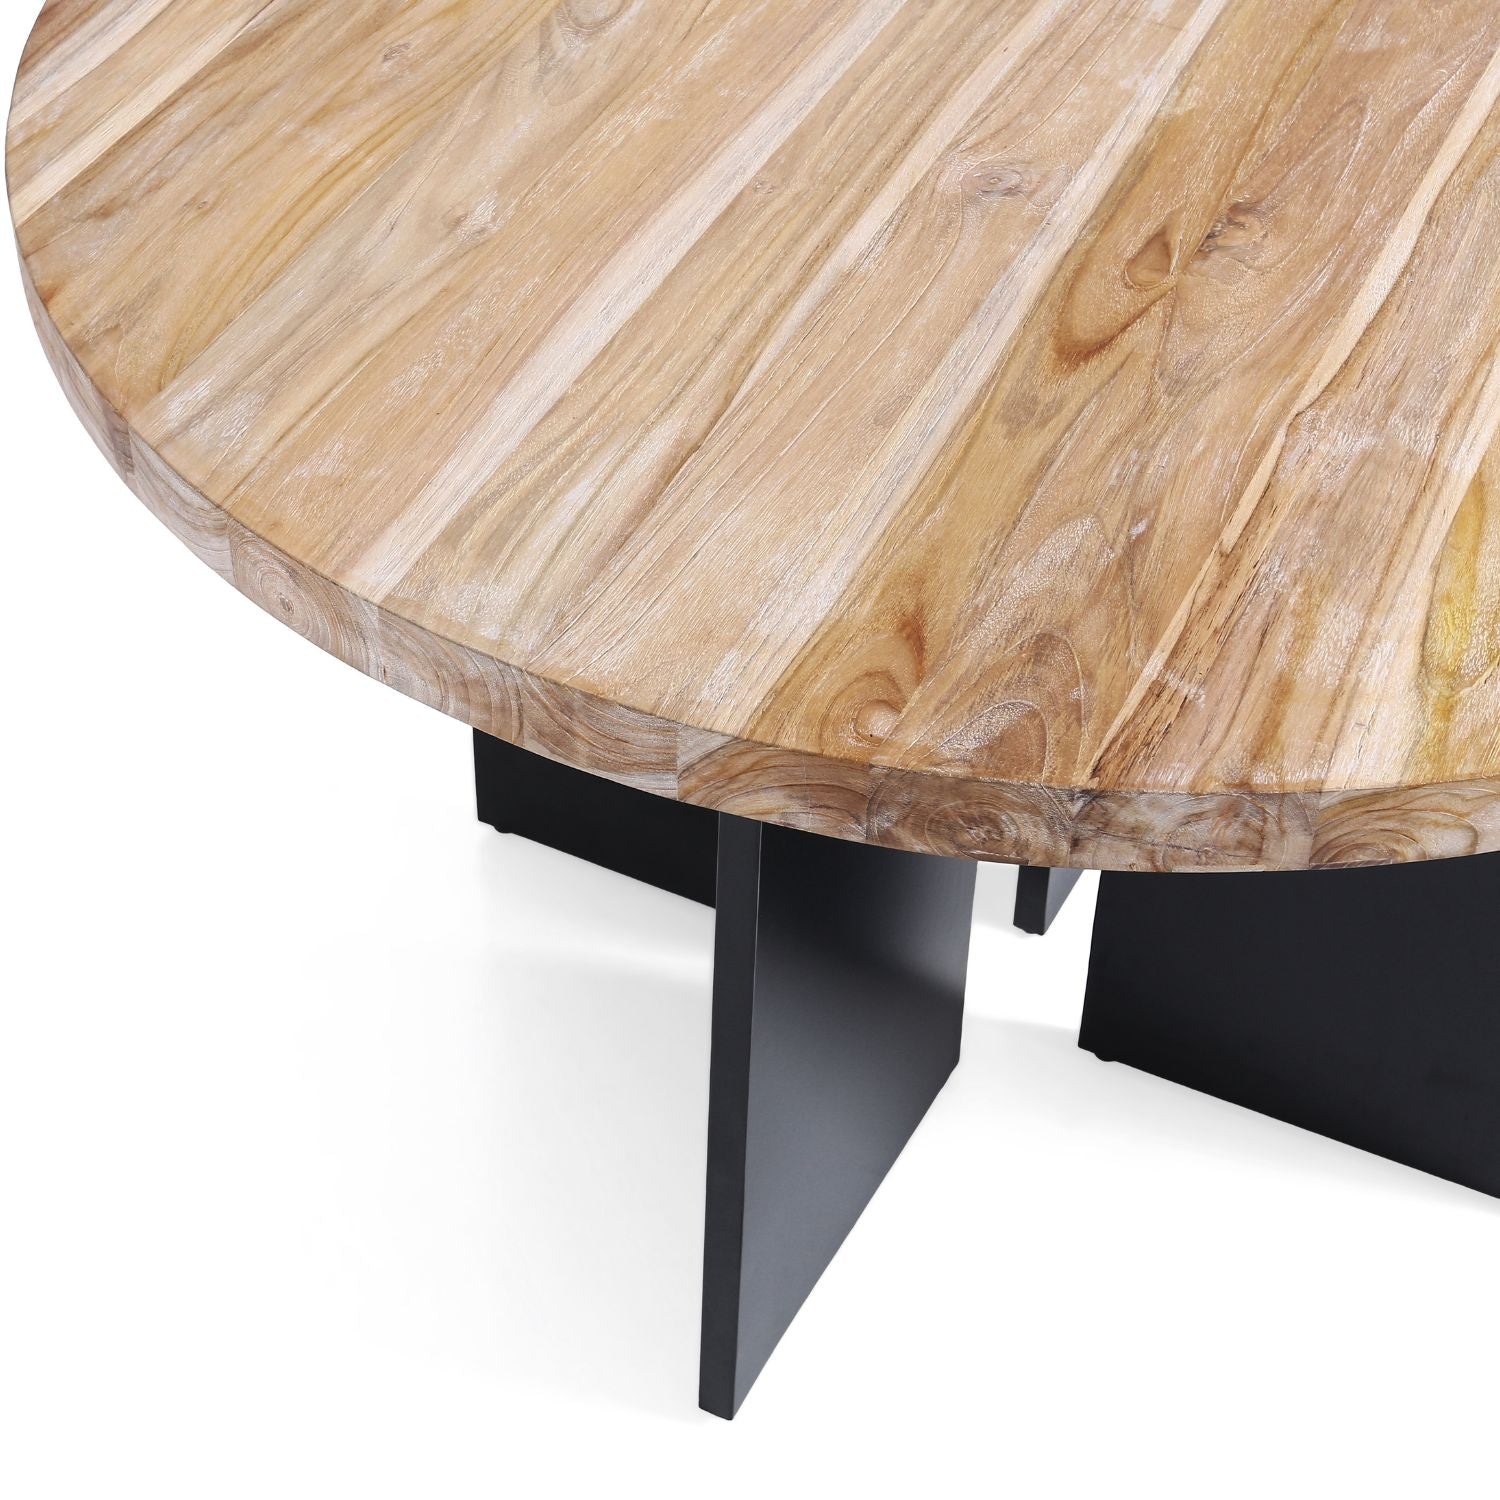 Aniline Dining Table - Valyou 